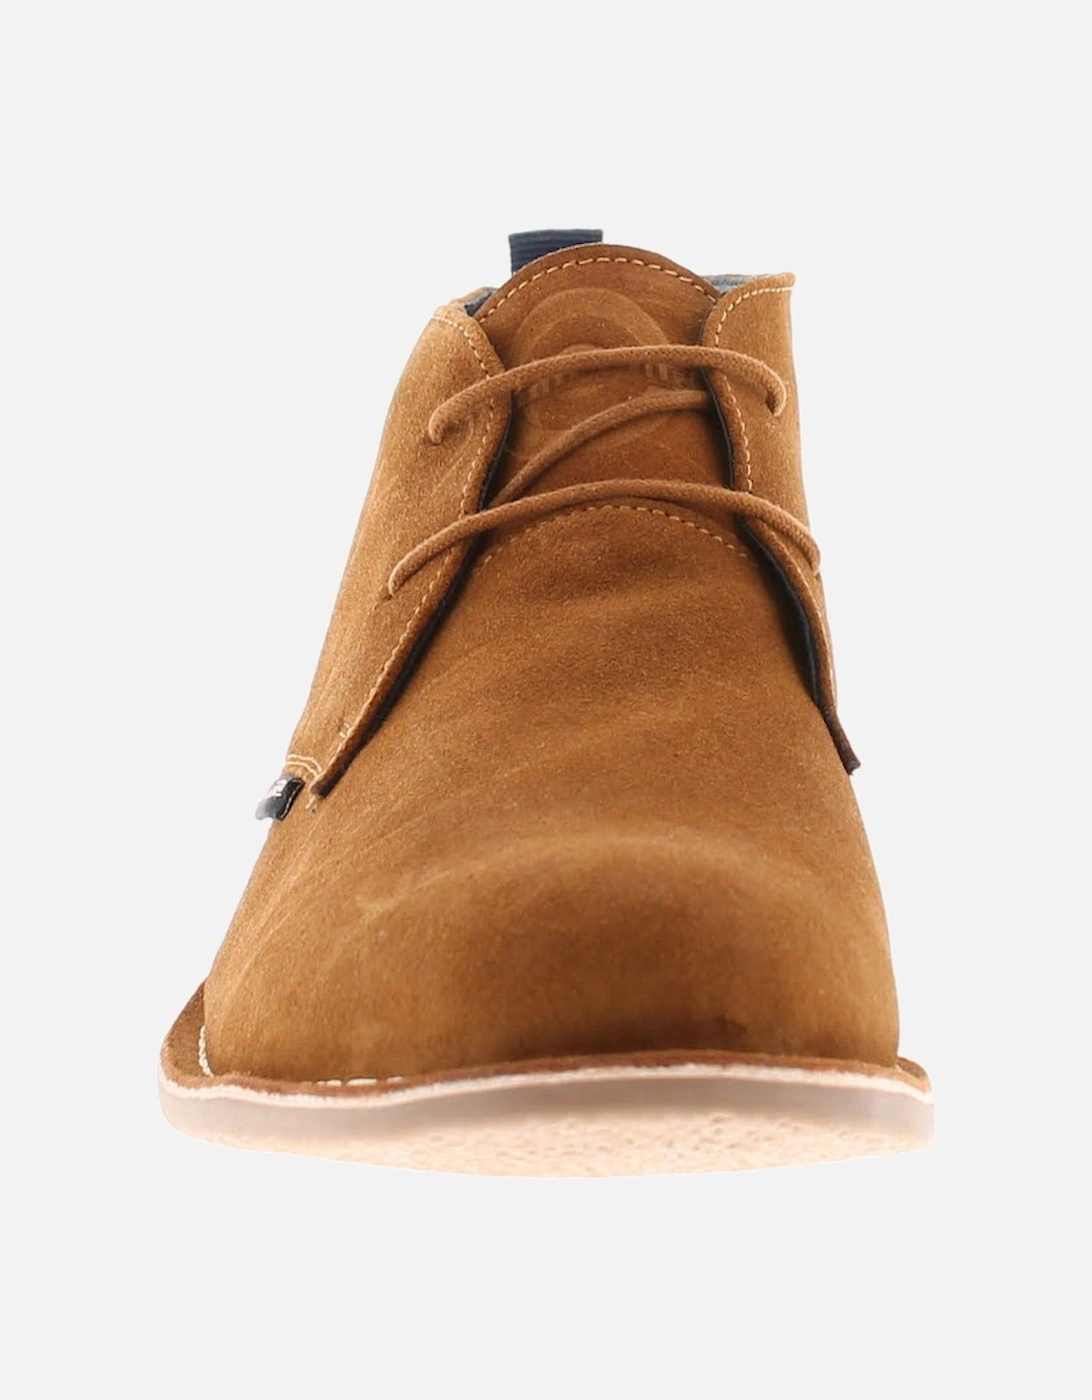 Mens Desert Boots Oliver Suede Leather Lace Up tan UK Size